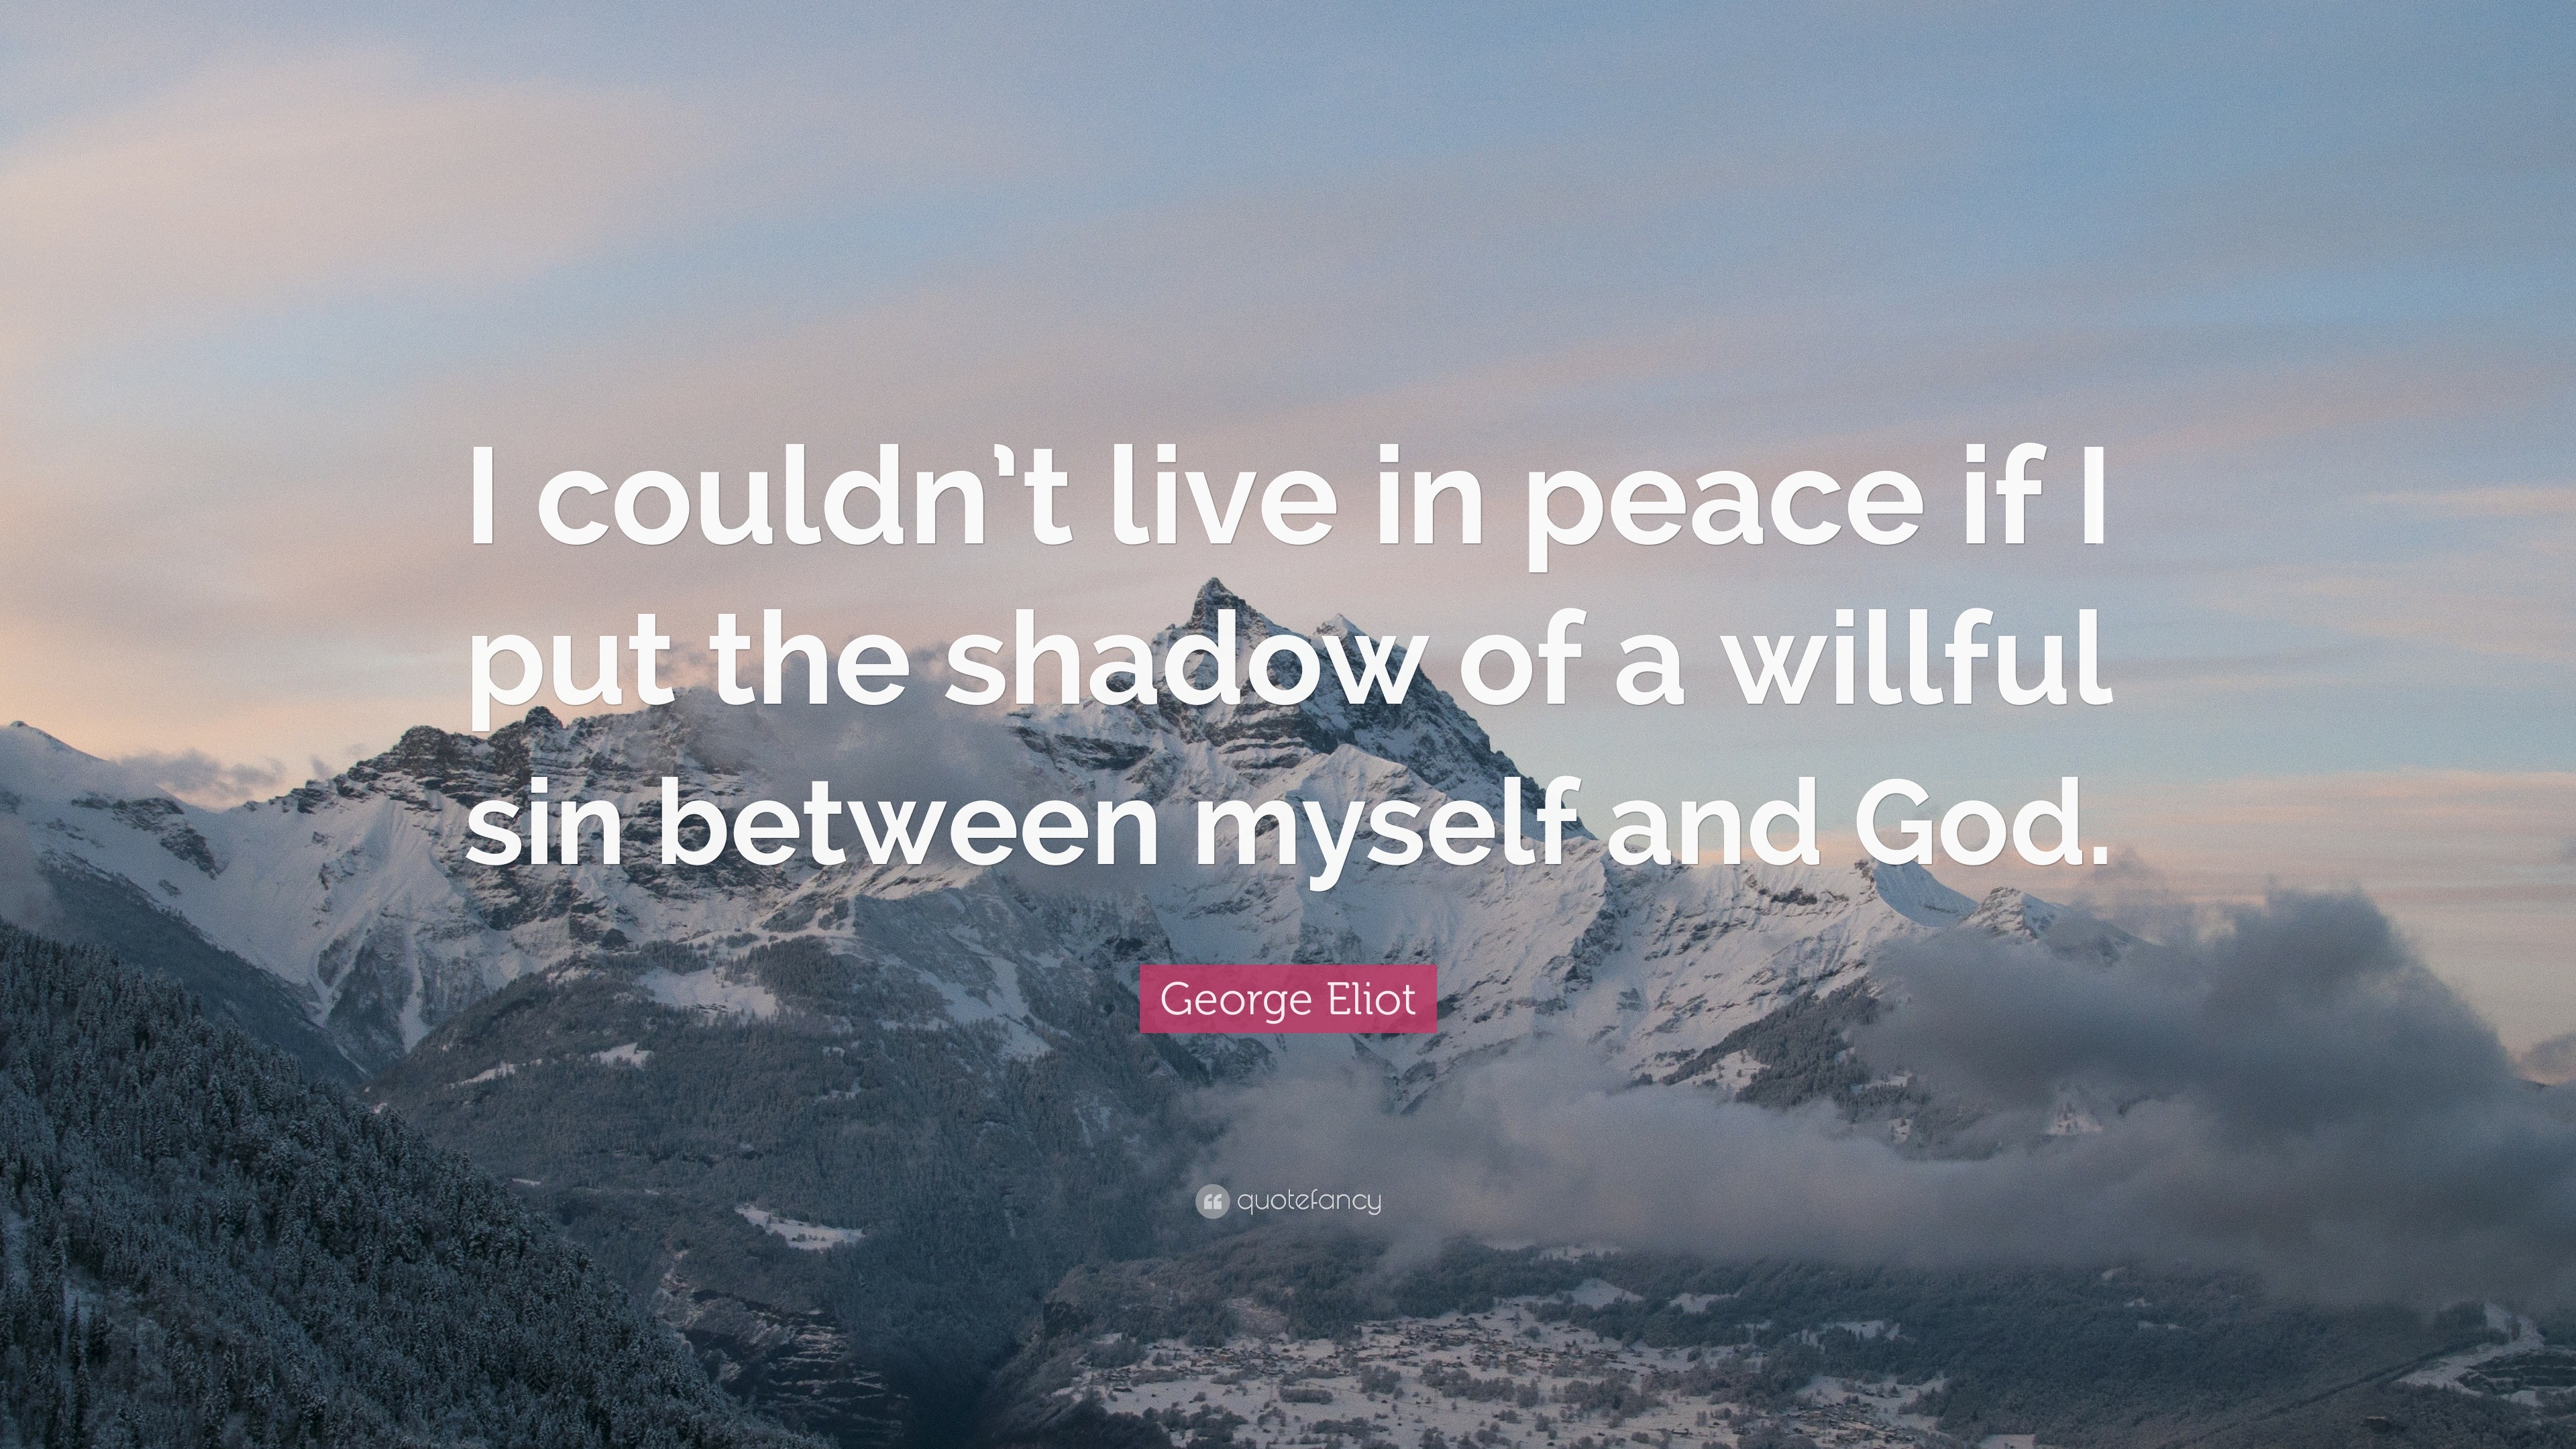 George Eliot Quote: “I couldn't live in peace if I put the shadow of a